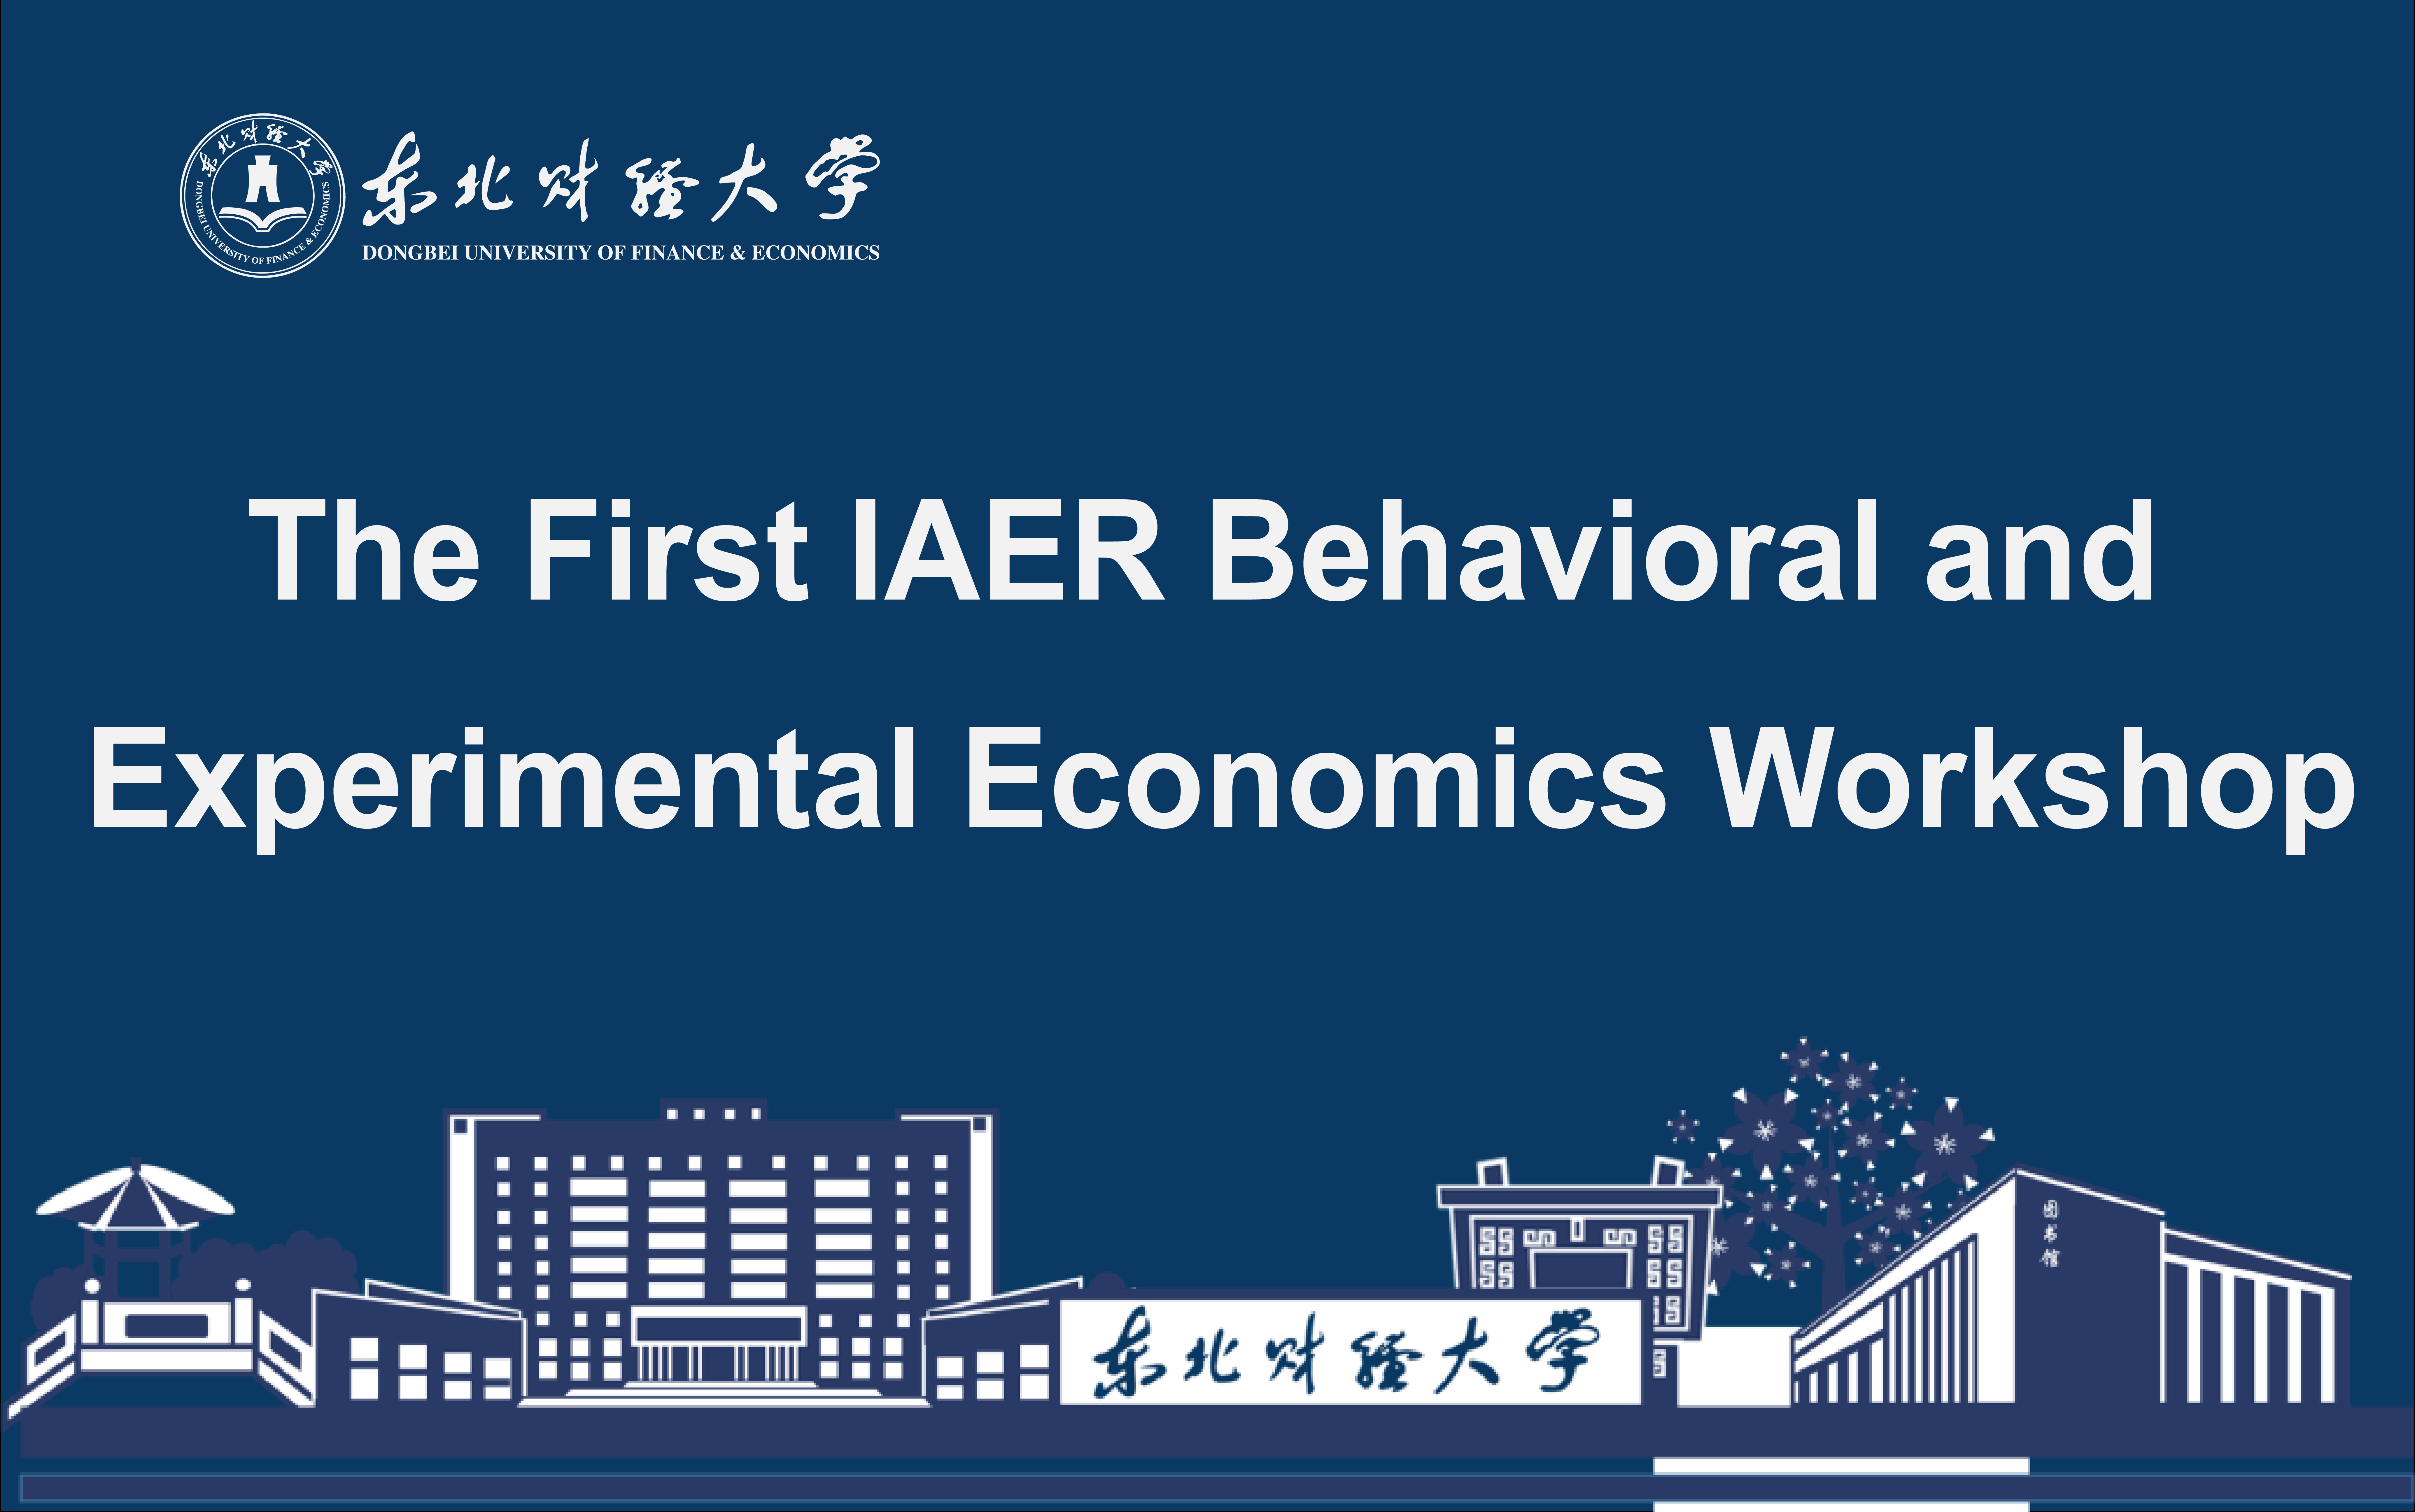 The First IAER Behavioral and Experimental Economics Workshop